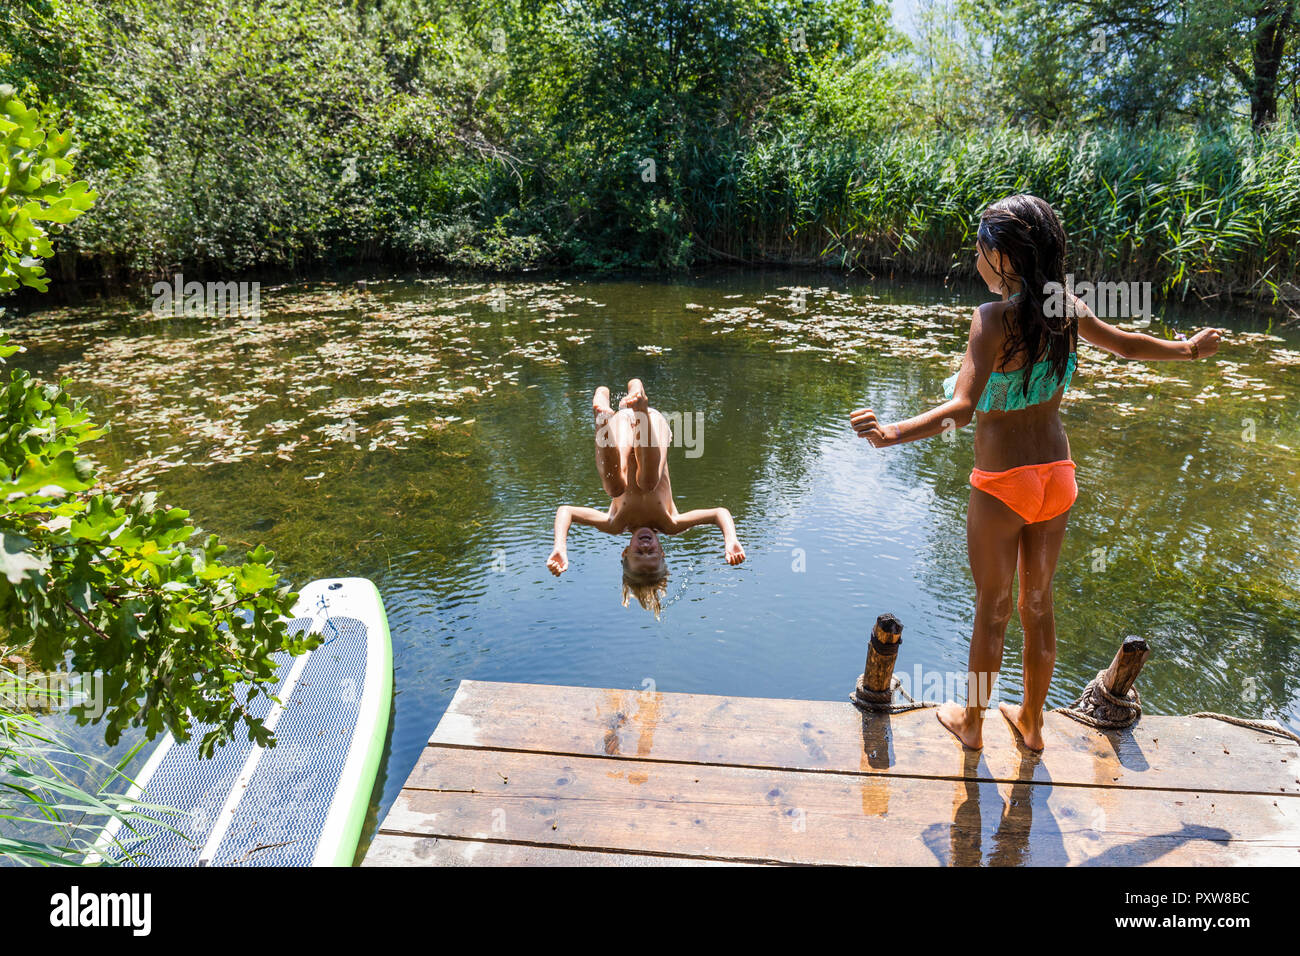 Girl watching her friend jumping into pond Stock Photo